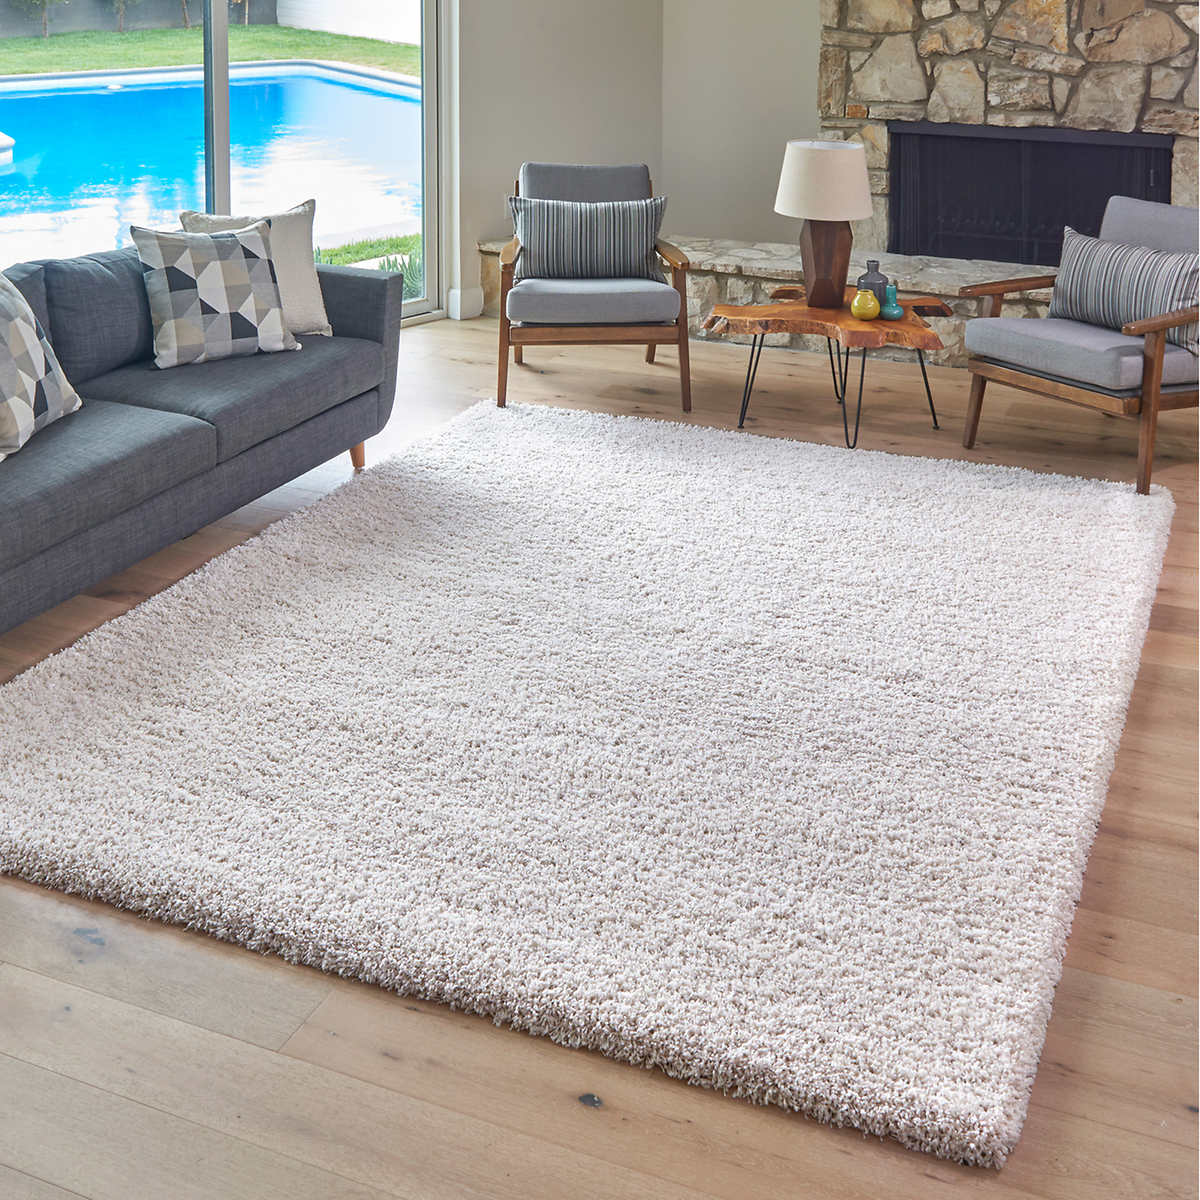 CHAMPAGNE SMALL TO LARGE  SHAGGY RUG RUNNERS THICK 5CM PILE WAREHOUSE CLEARANCE 